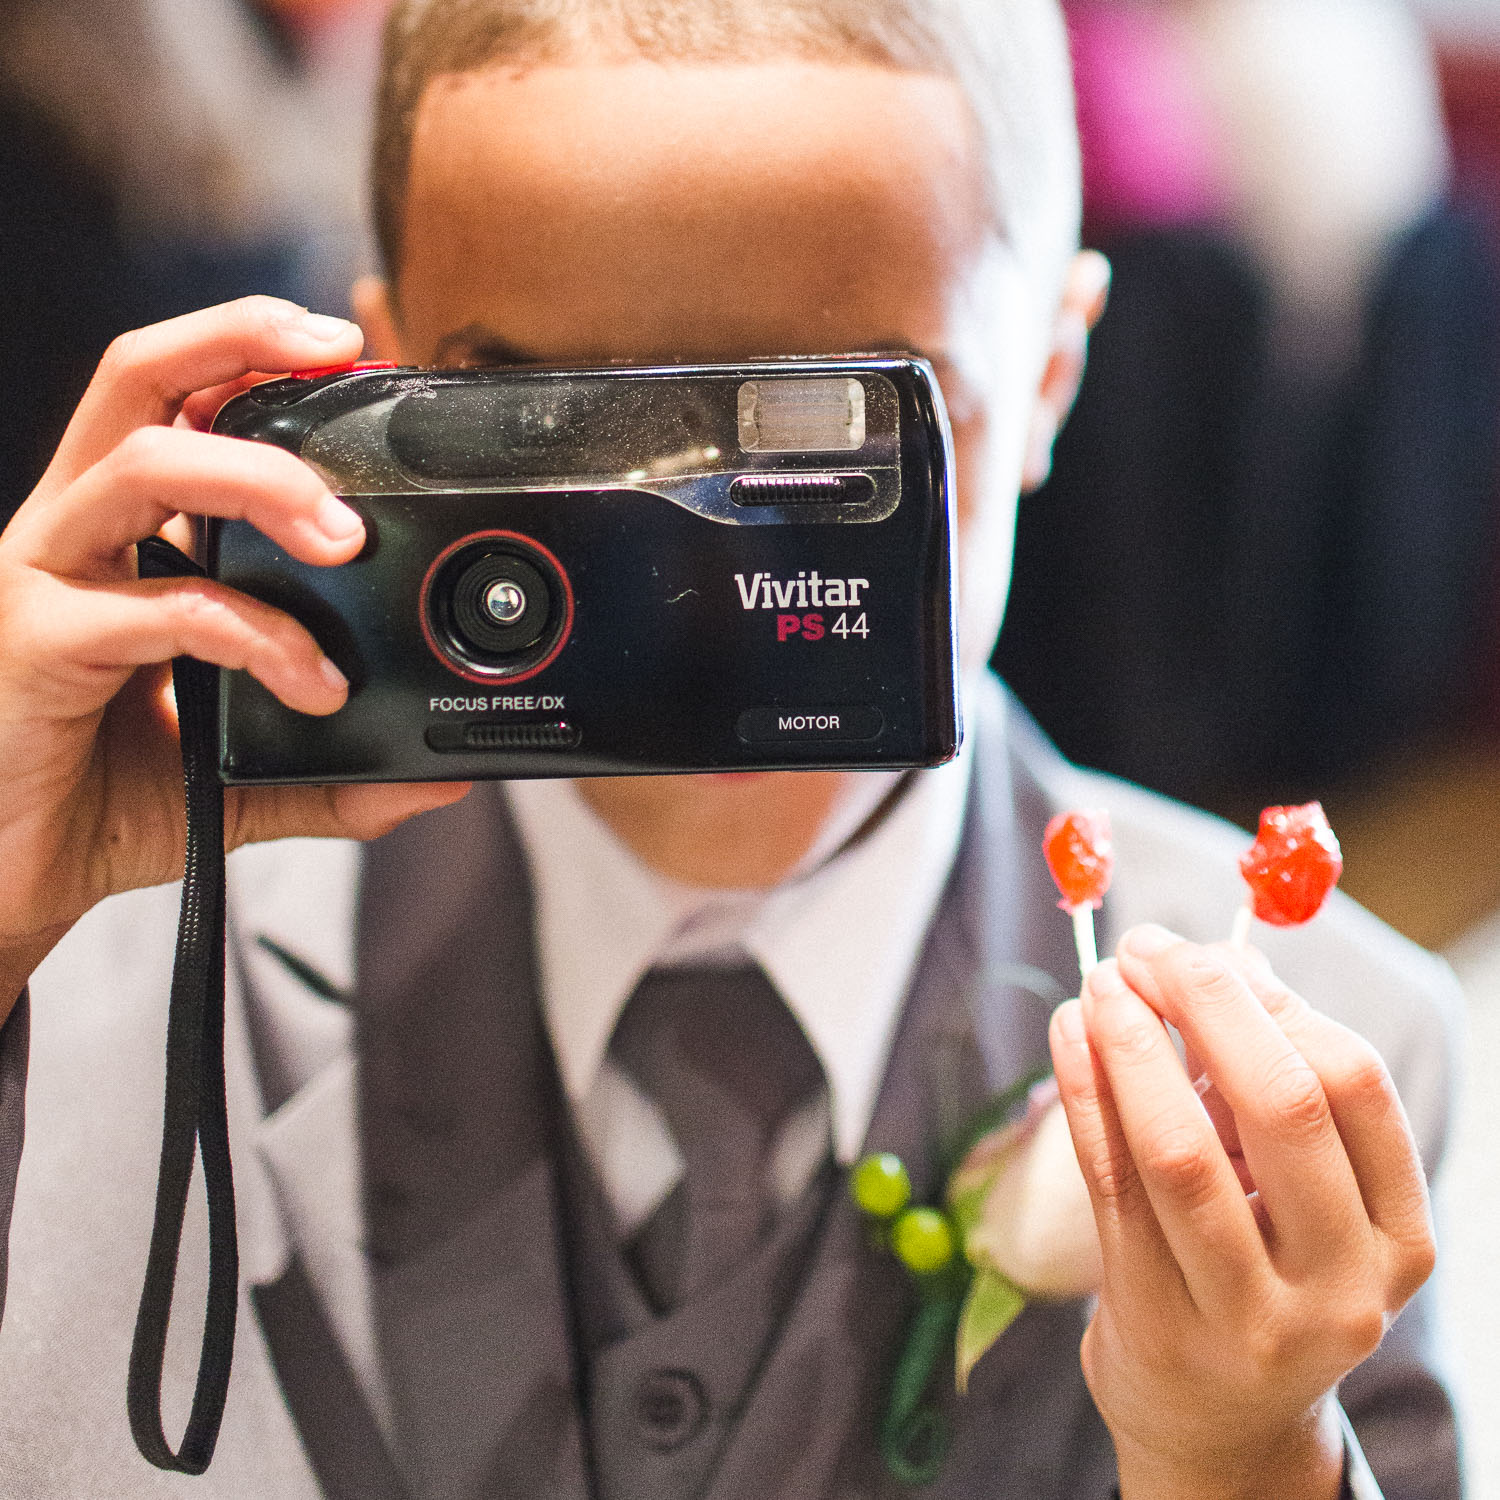 Why you don't need a wedding photographer reason 33 1/3: You can Instagram the kid with an 80s era film point-and-shoot and score a zillion likes.